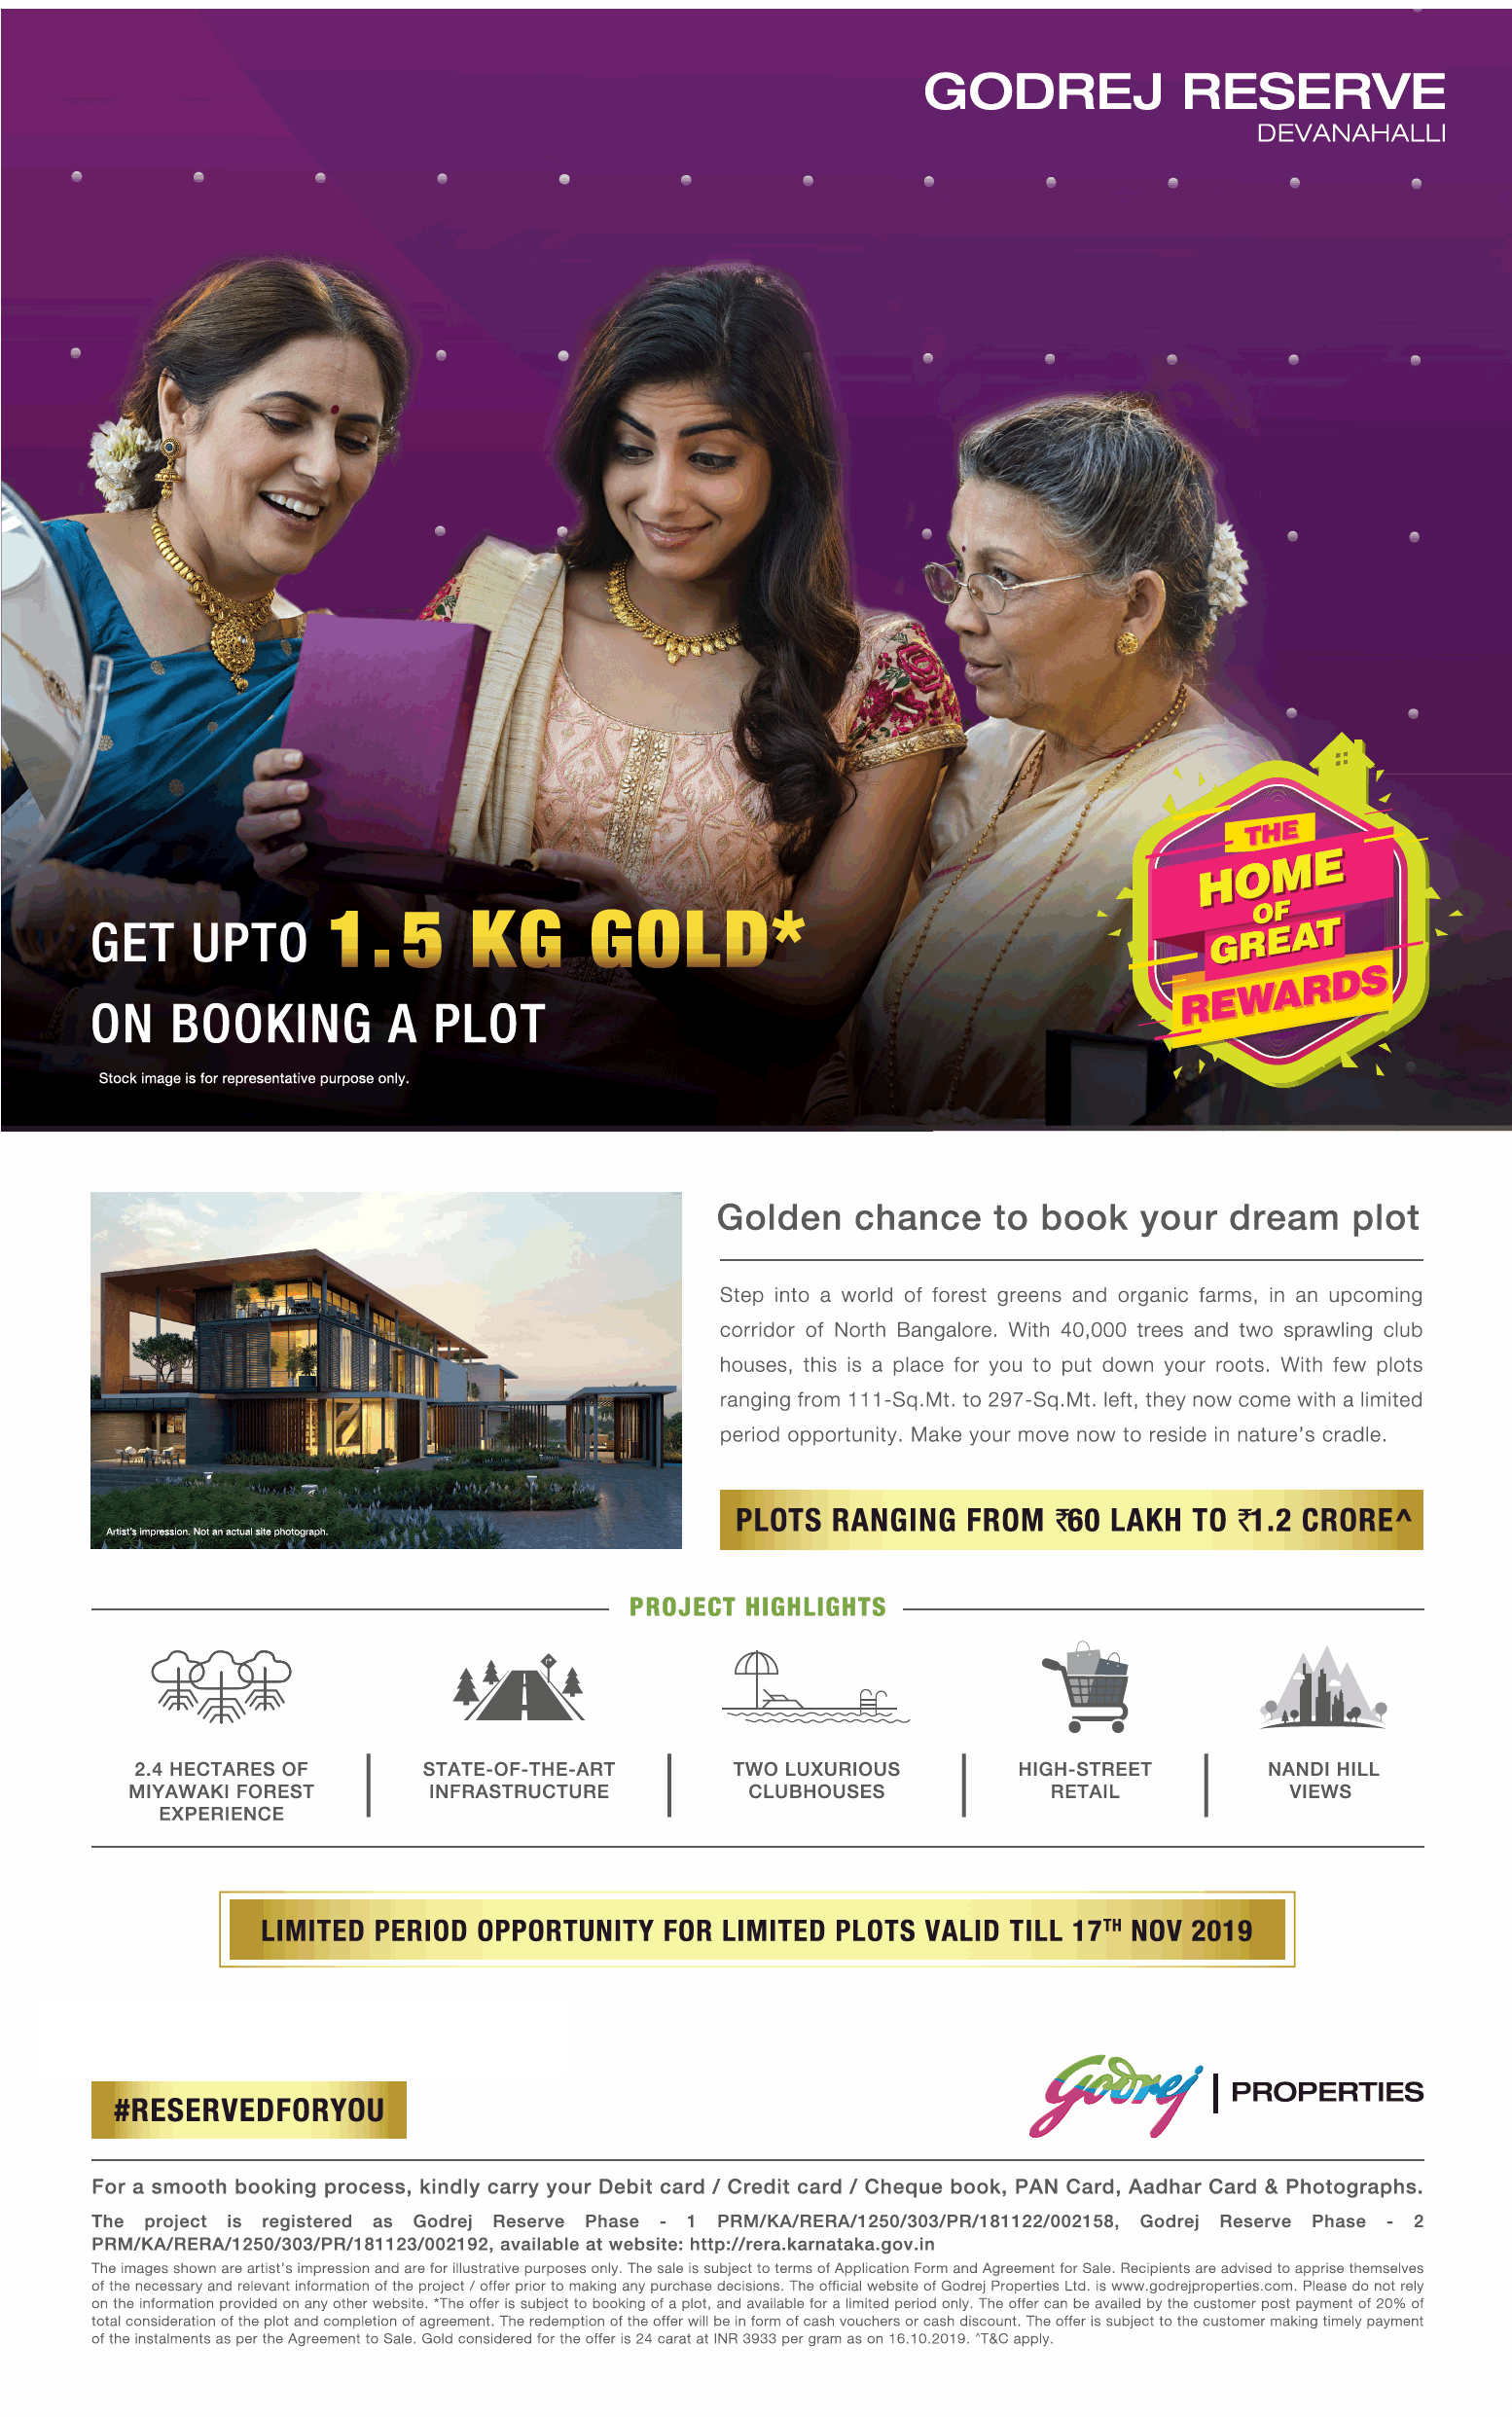 Get upto 1.5 KG gold on booking a plot at Godrej Reserve in Devanahalli, Bangalore